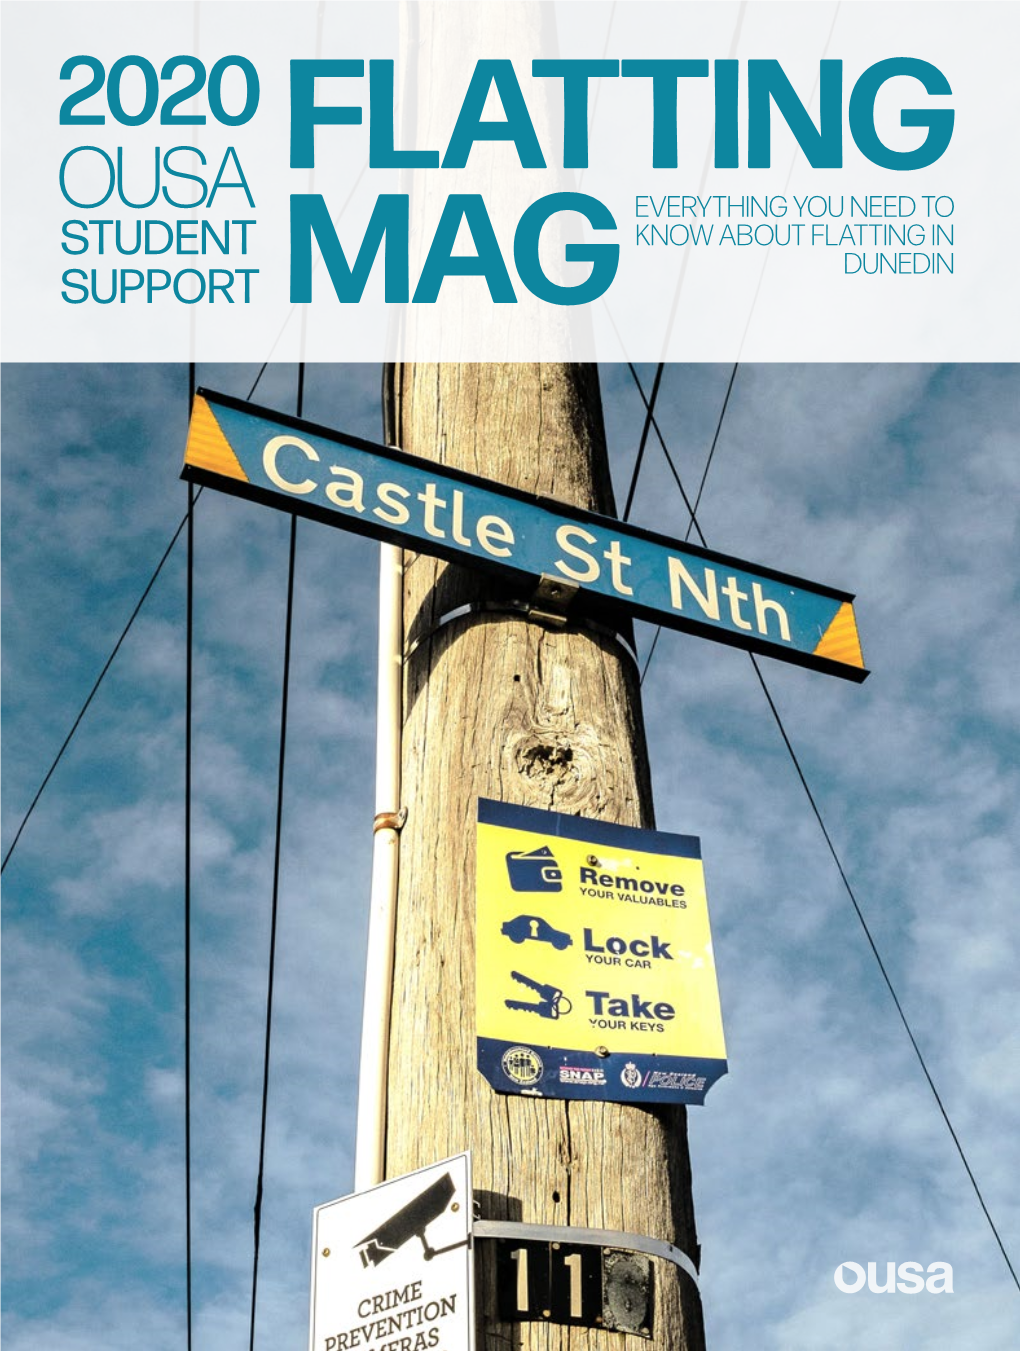 FLATTING OUSA EVERYTHING YOU NEED to STUDENT KNOW ABOUT FLATTING in DUNEDIN SUPPORT MAG 2 3 Contents